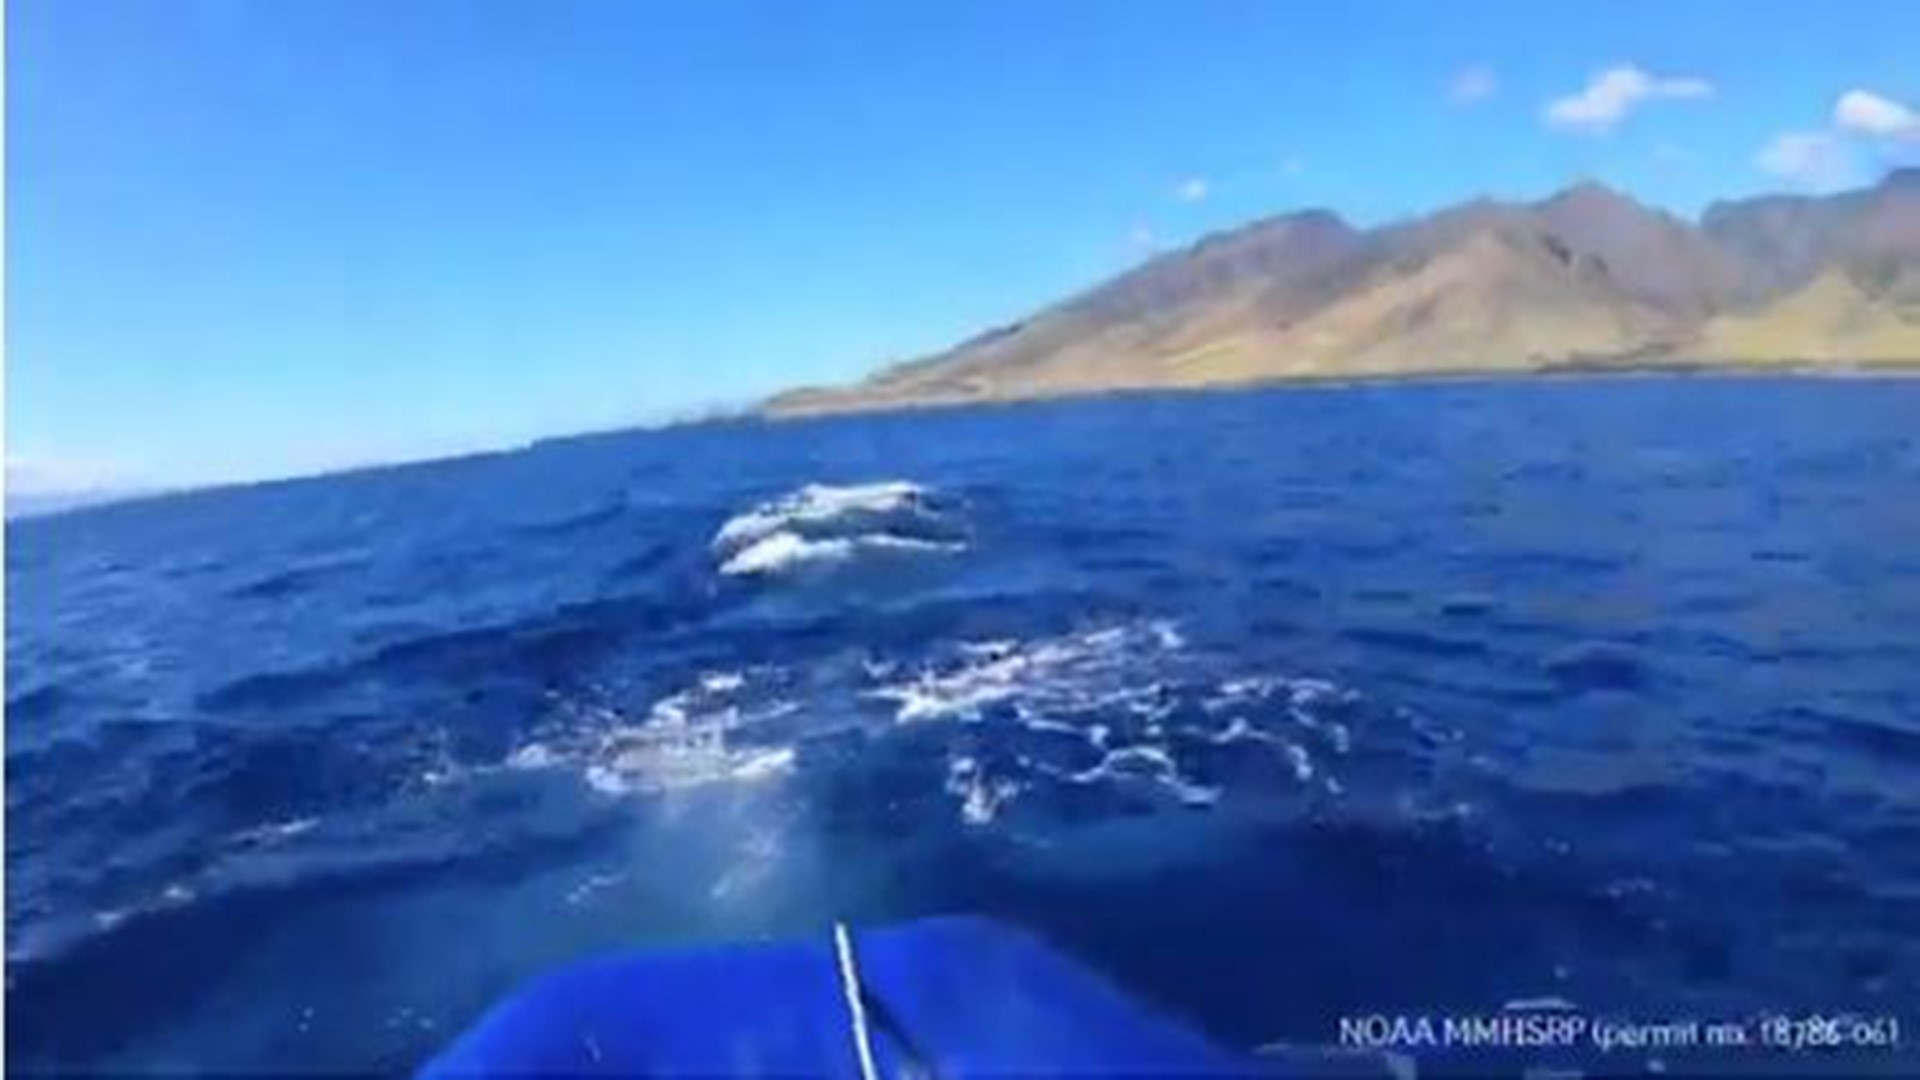 A yearling humpback whale off Hawaii has been freed from a life-threatening entanglement in mooring gear.